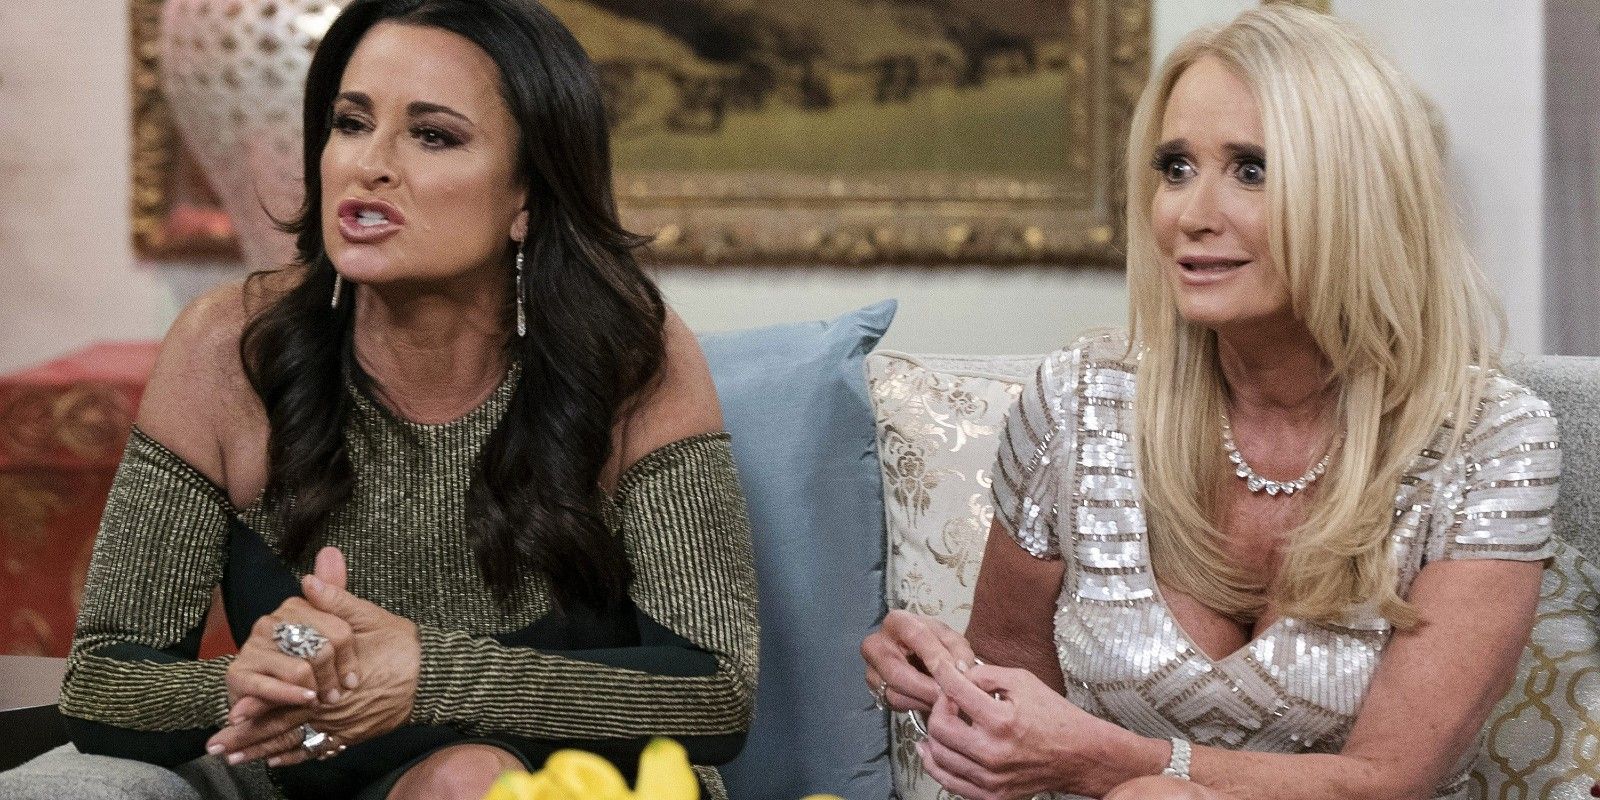 kyle and kim Richards fighting on a couch